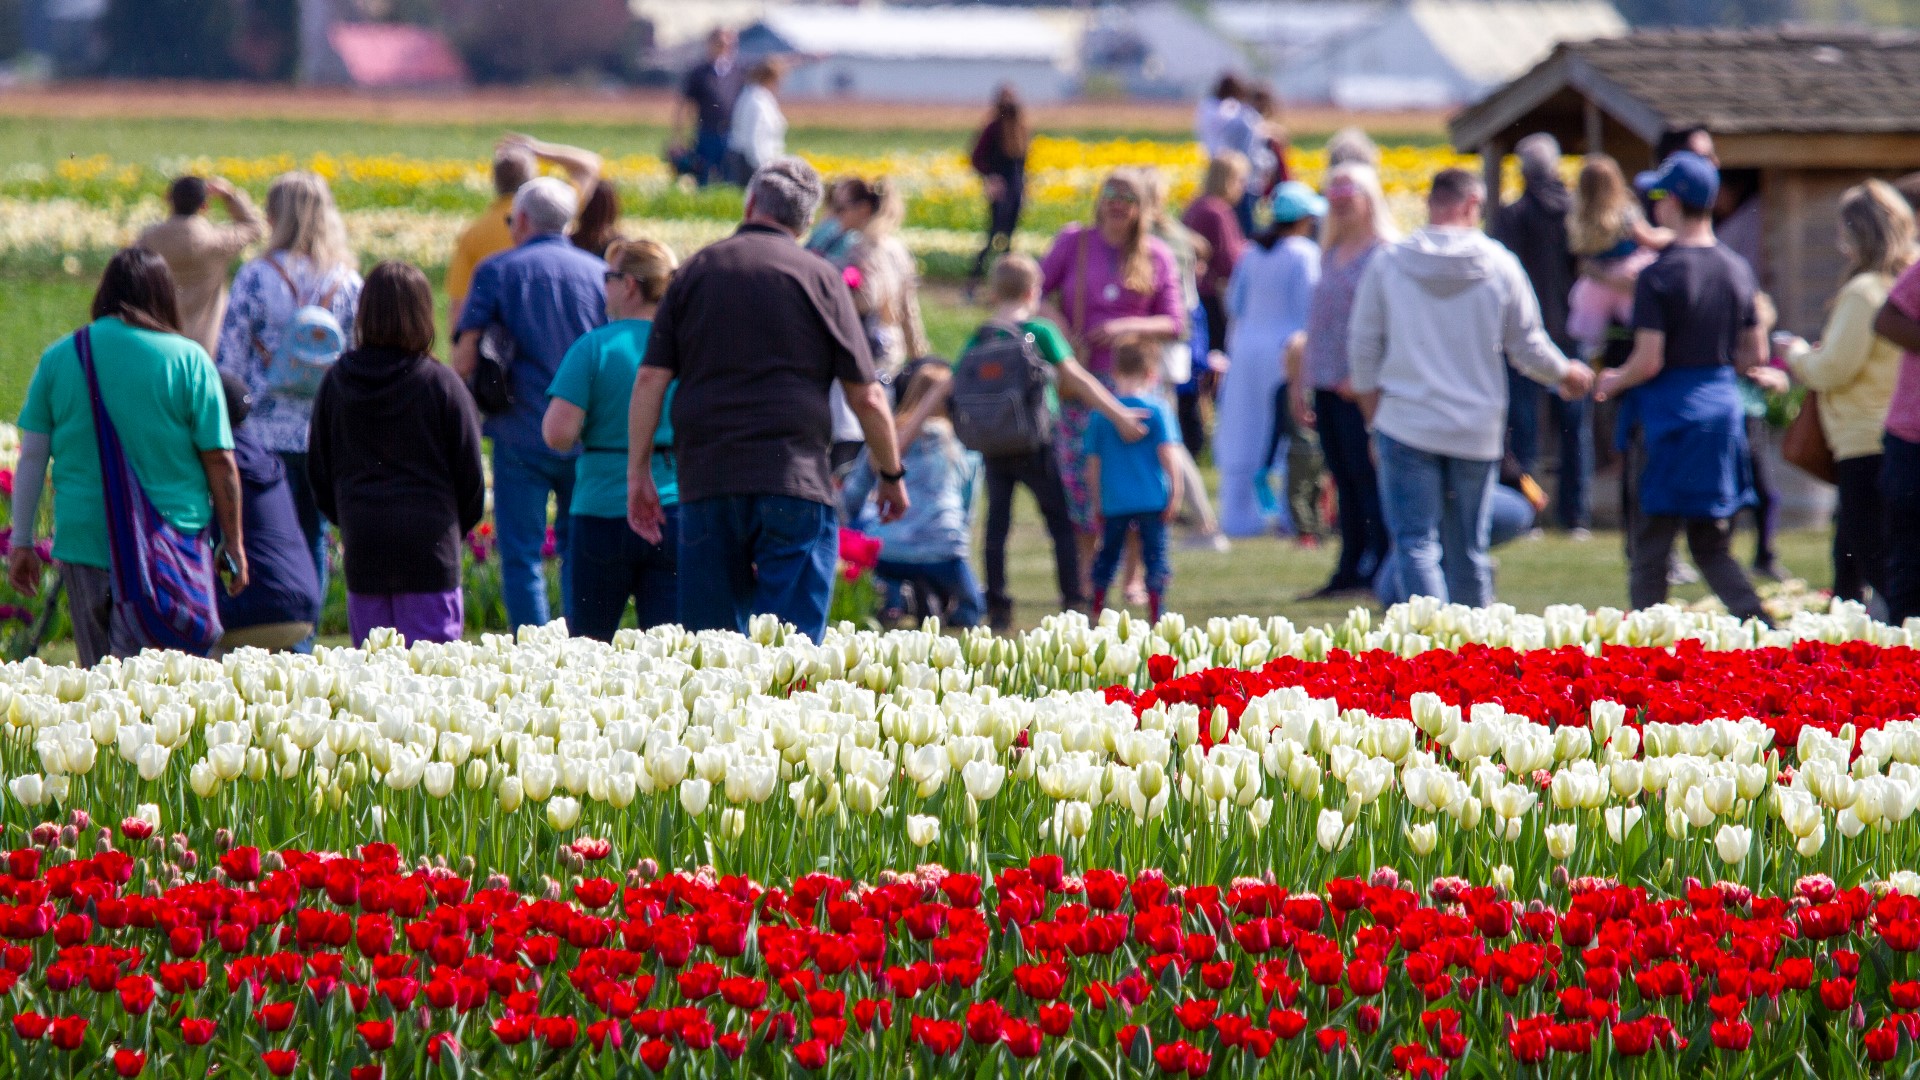 Tulips in bloom Photos of the 2022 Skagit Valley Tulip Festival